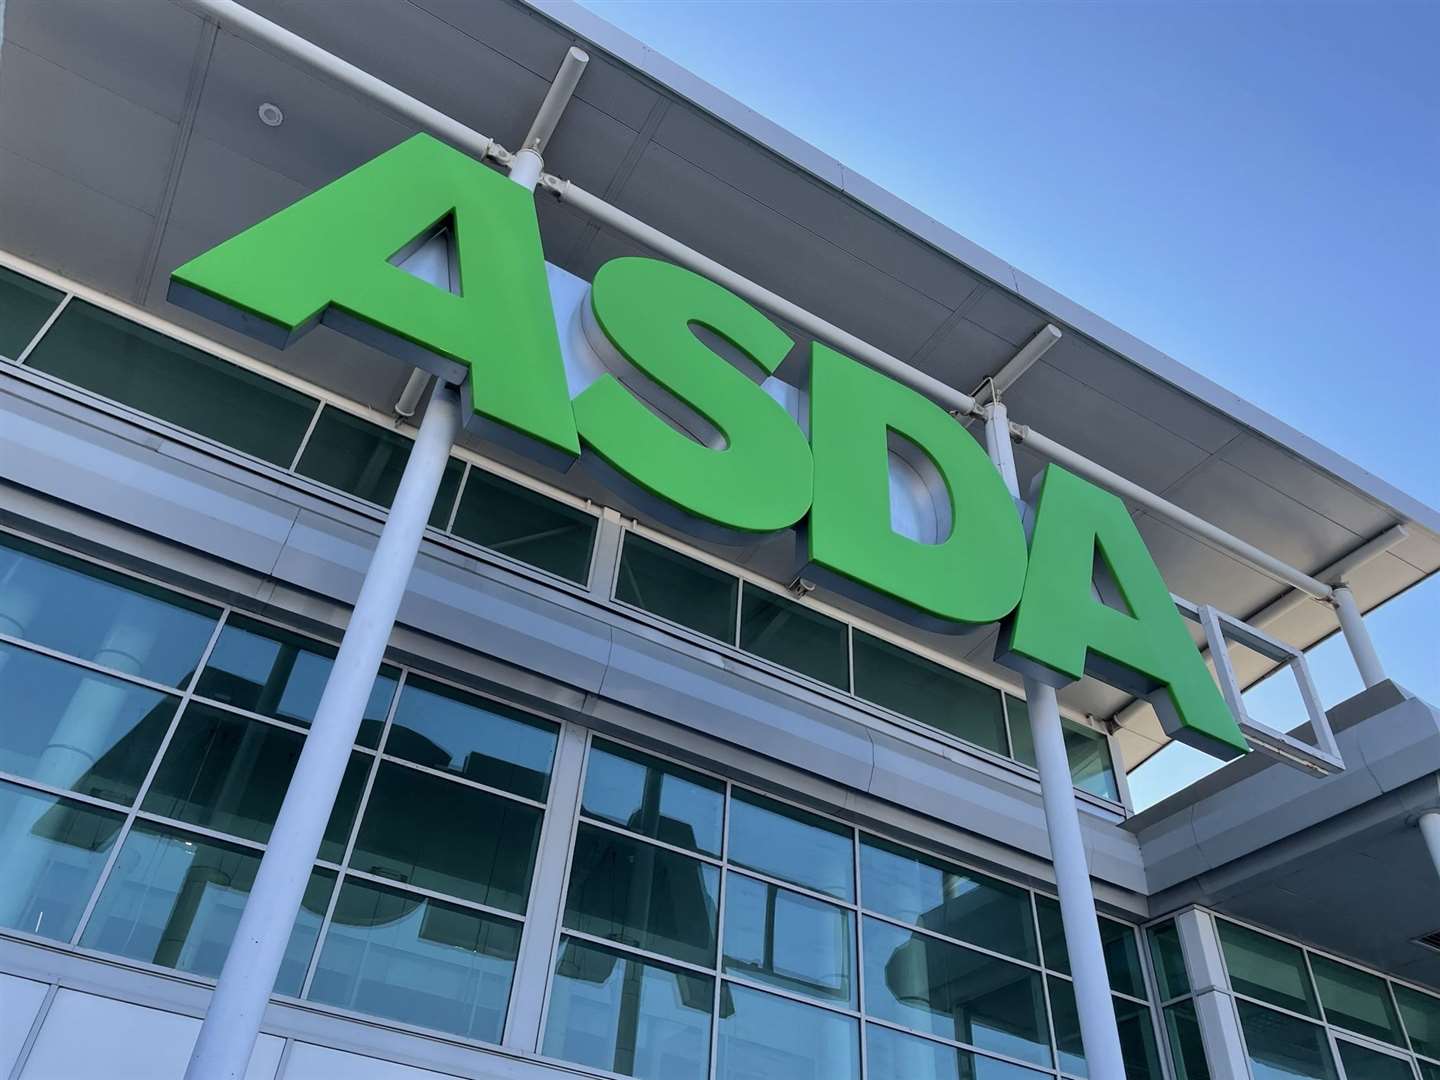 Asda says it has served up 1.2 million meals under the offers since last June